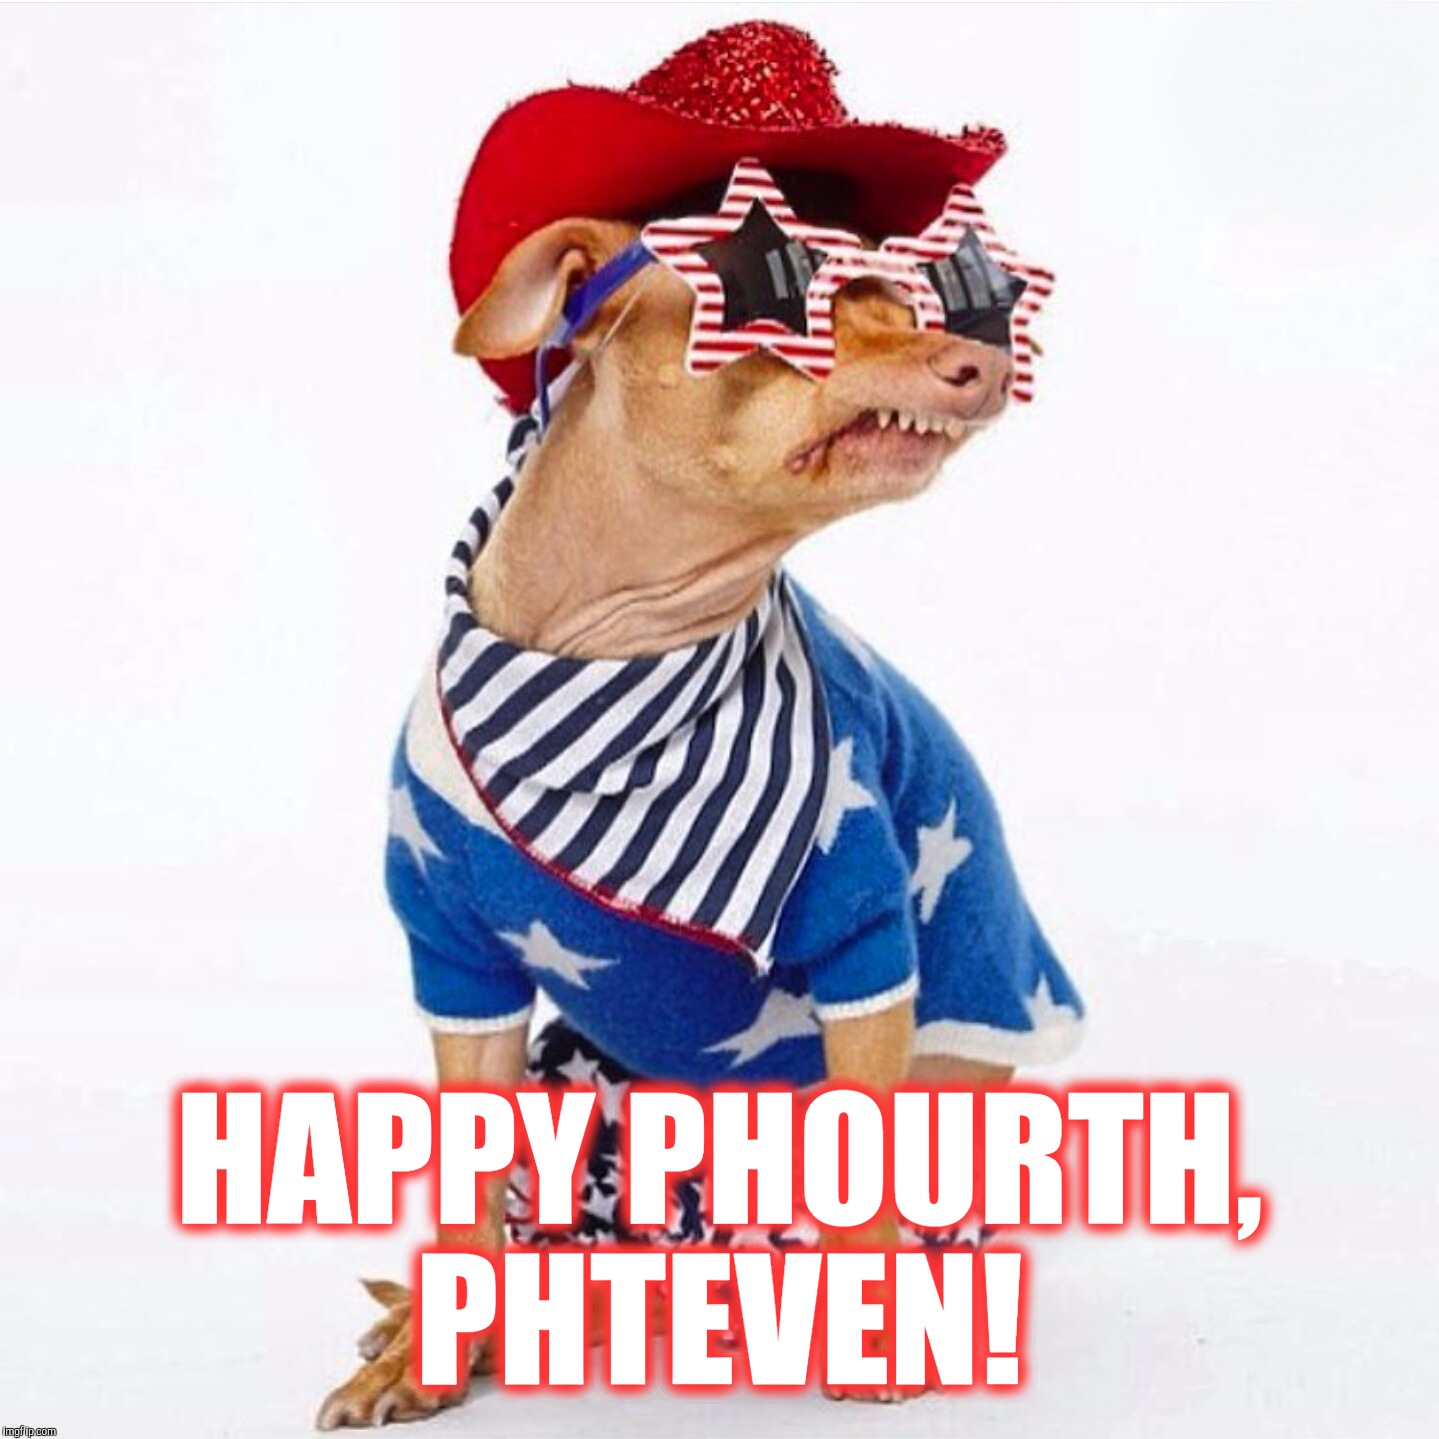 Happy Phourth, Phteven!  |  HAPPY PHOURTH, PHTEVEN! | image tagged in phteven,independence day,4th of july,fourth of july,patriotic,funny memes | made w/ Imgflip meme maker